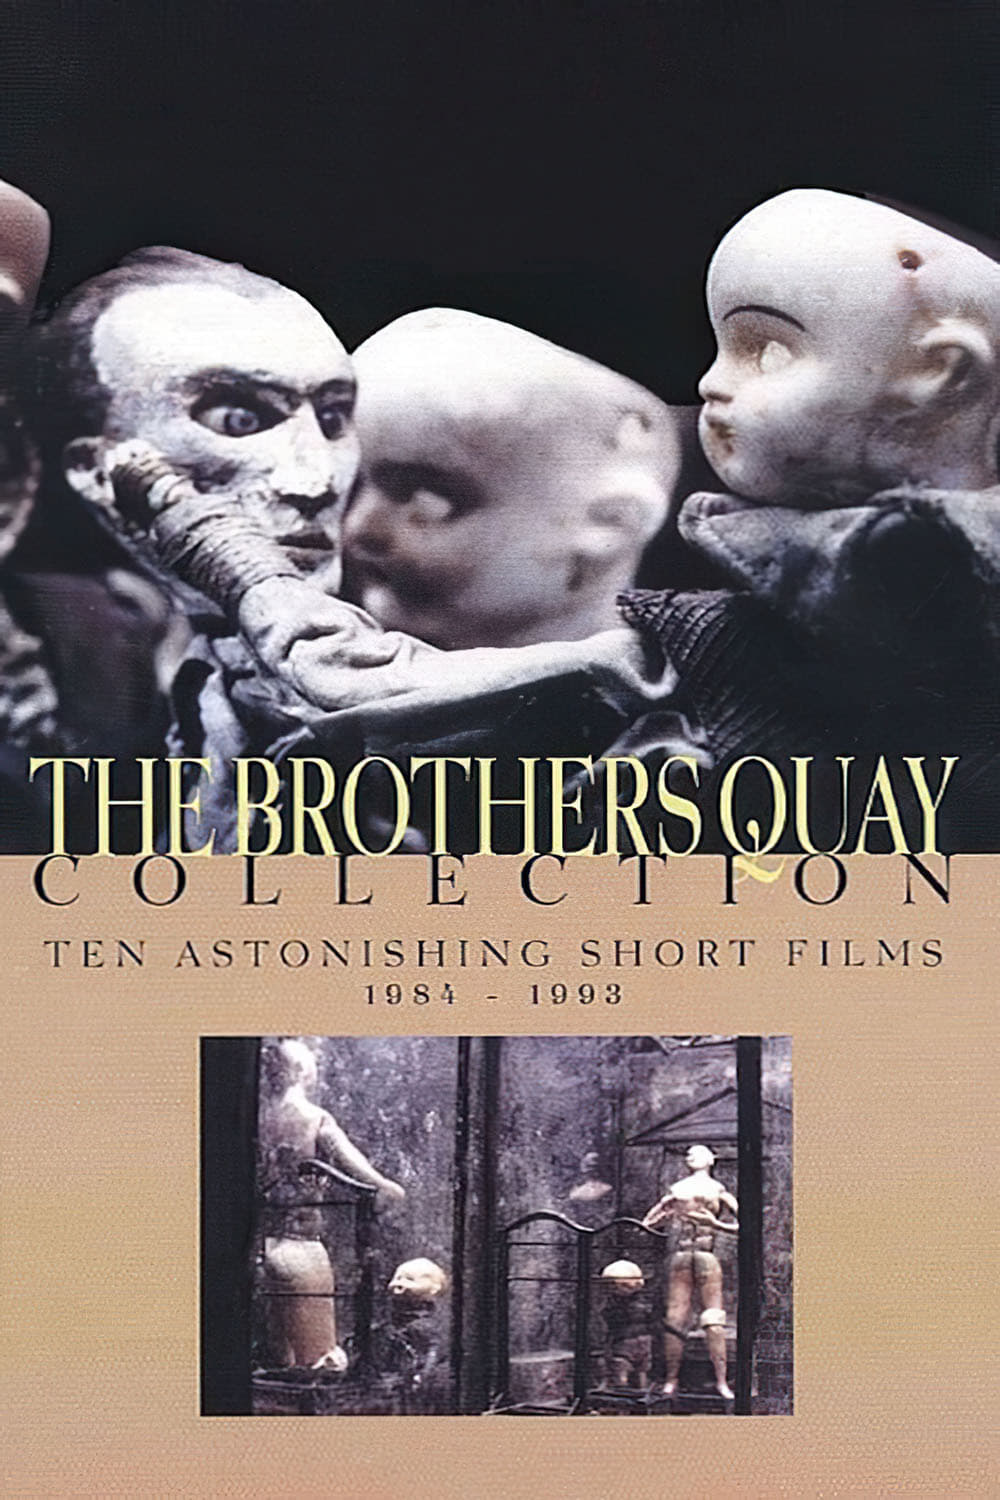 The Brothers Quay Collection: Ten Astonishing Short Films 1984-1993